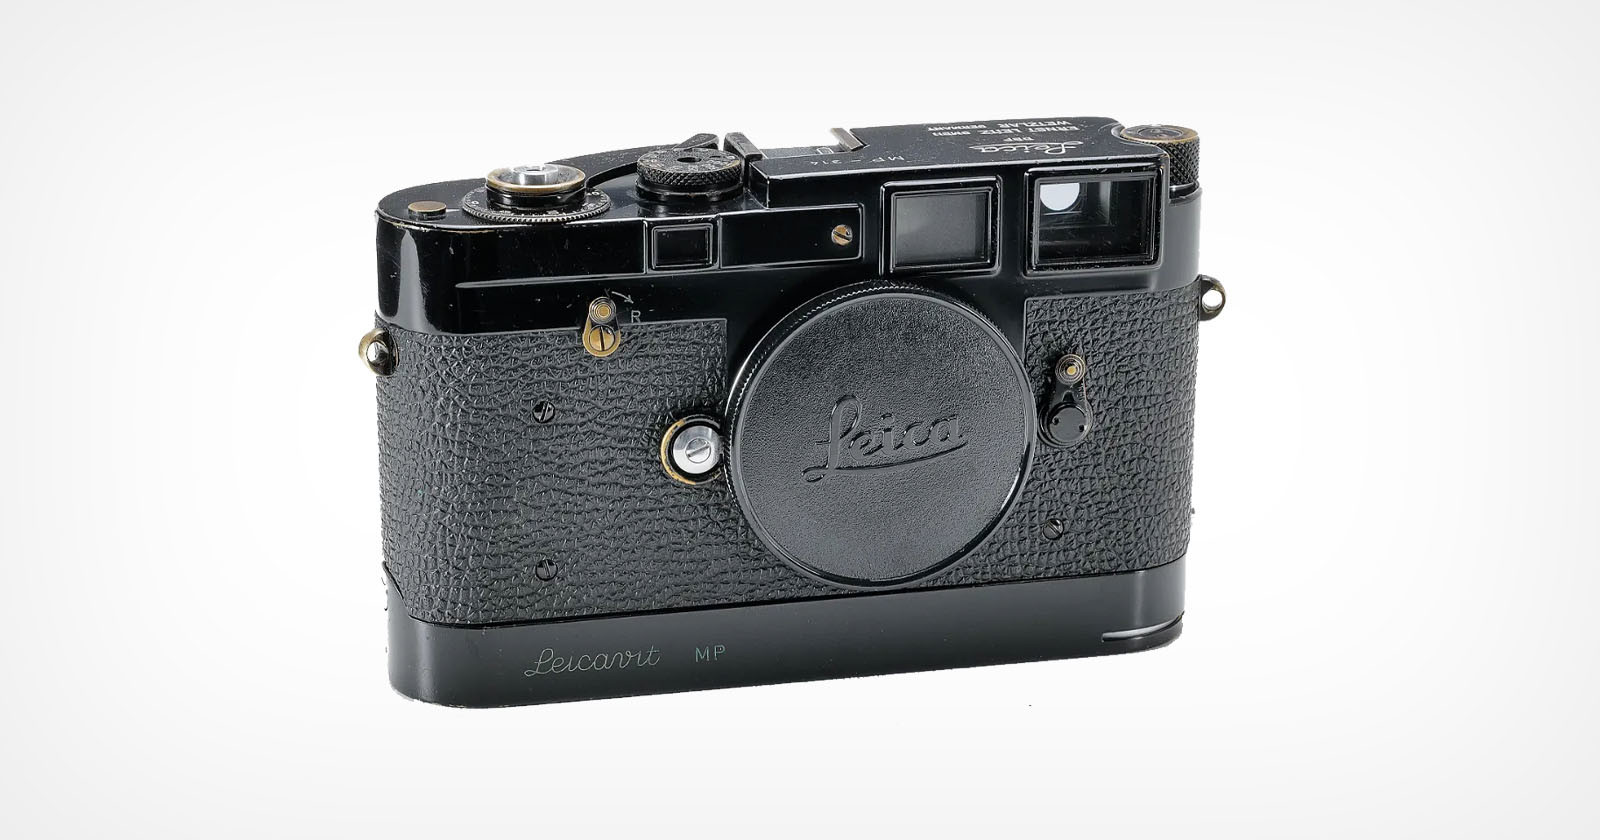 A Camera Similar to the One That Sold for $1.34M is Coming to Auction